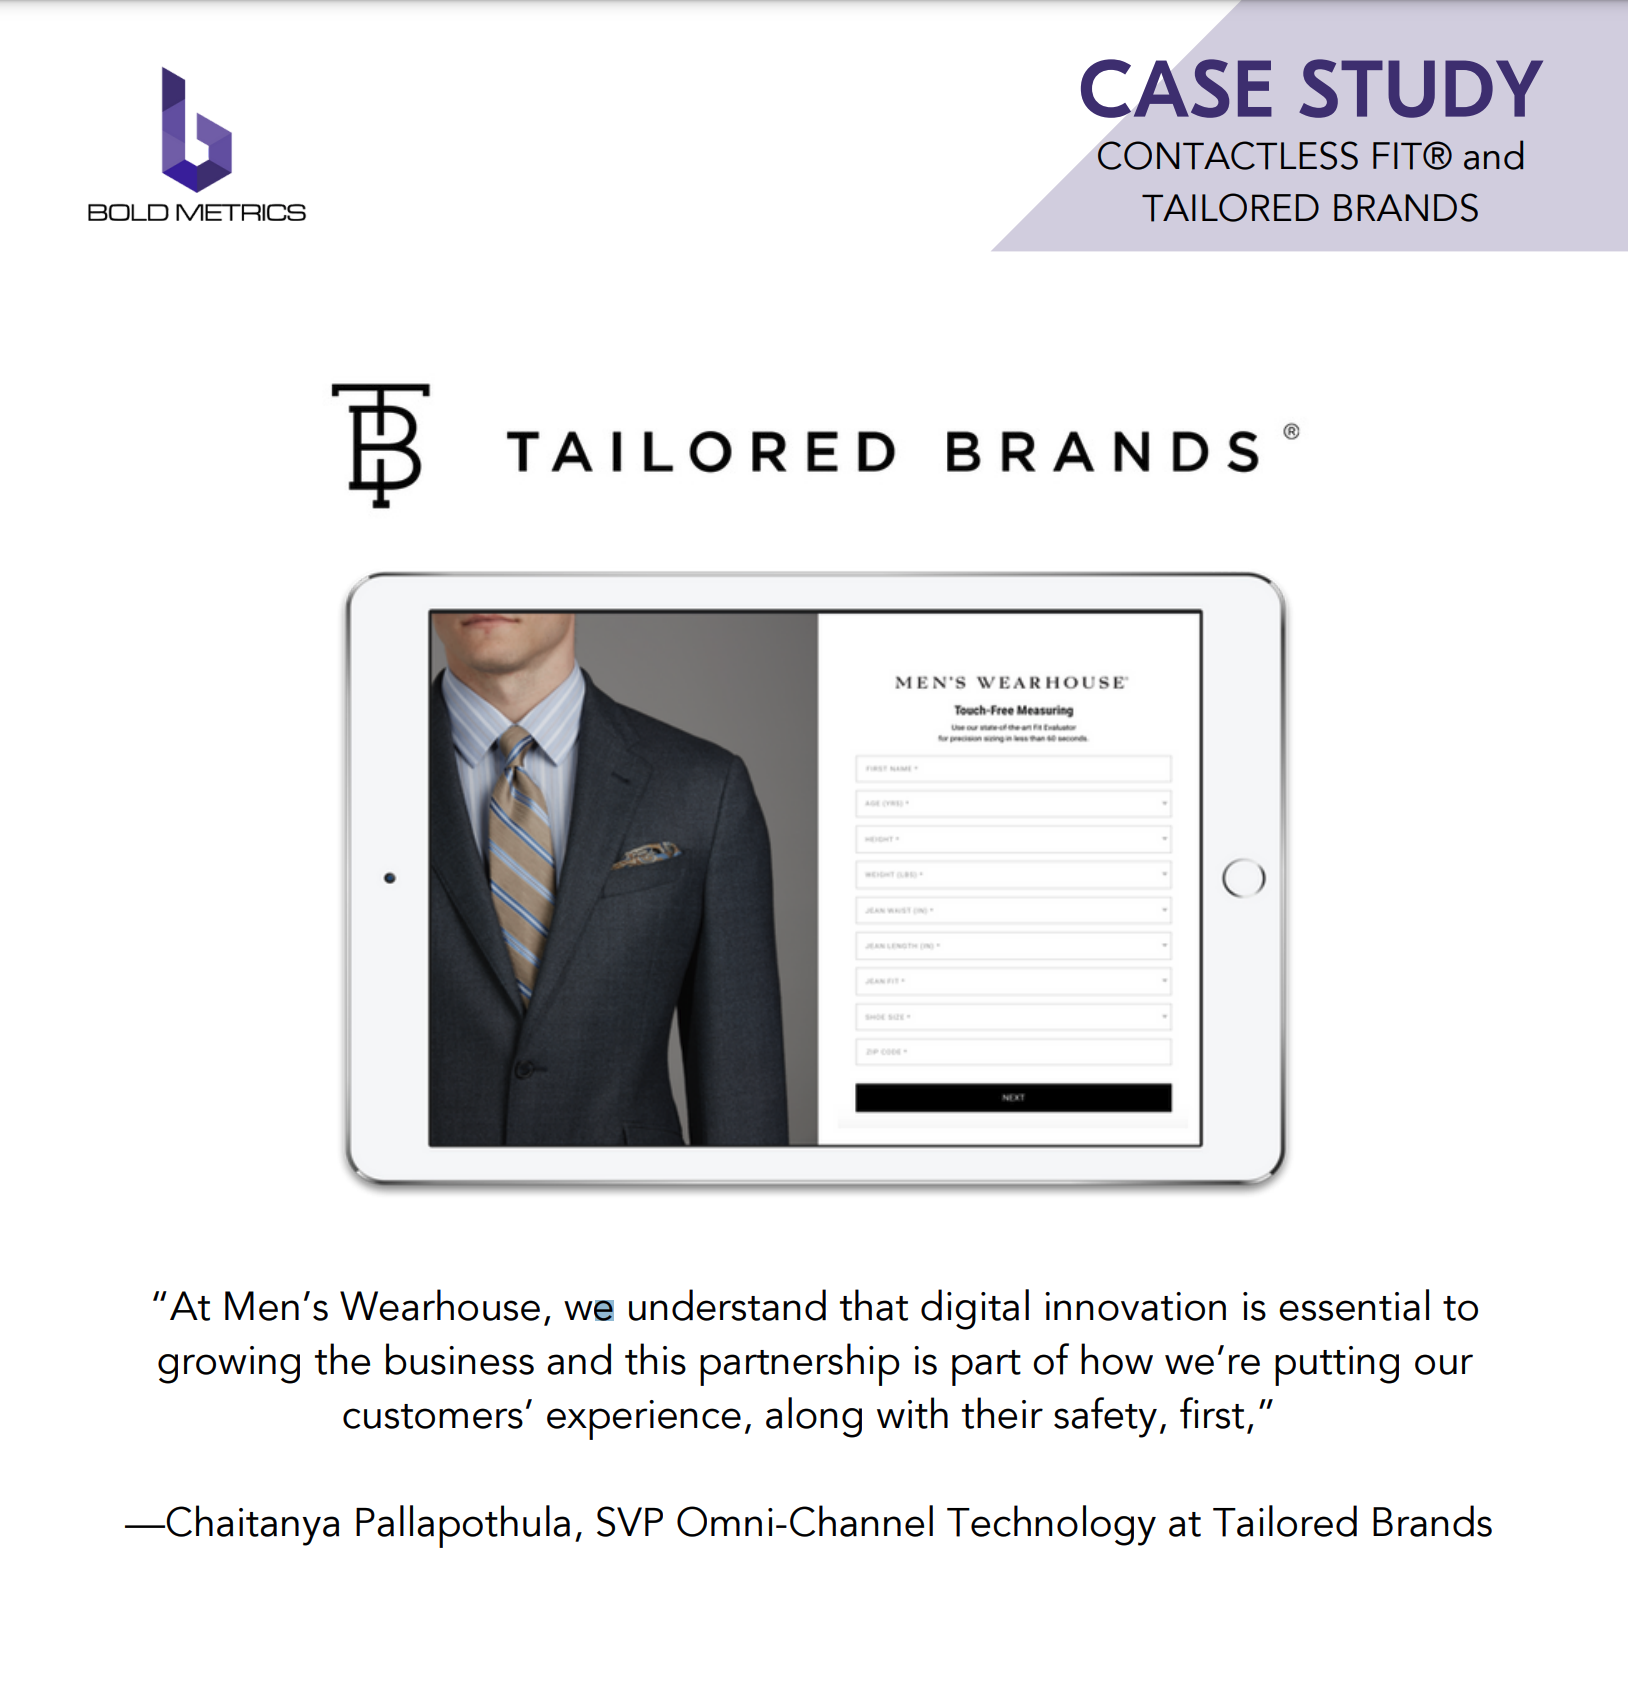 Tailored Brands Case Study